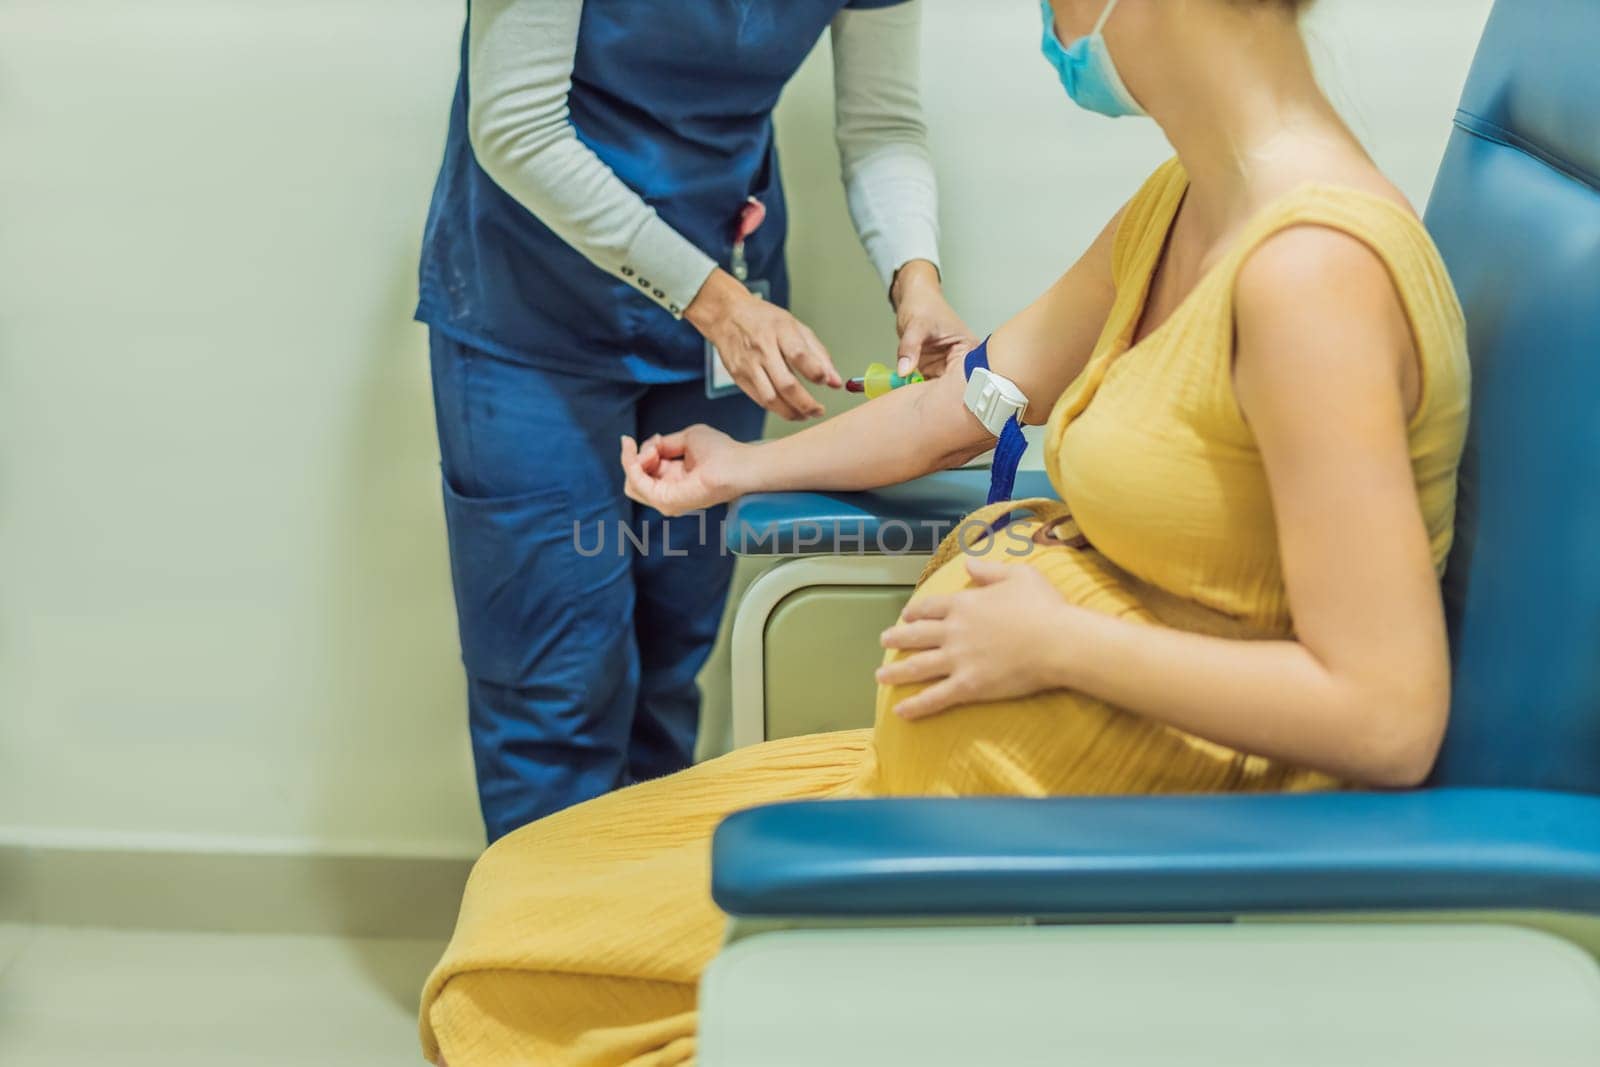 pregnant woman undergoes a blood test, a pivotal step in ensuring the well-being of both herself and her developing baby during the maternity journey by galitskaya